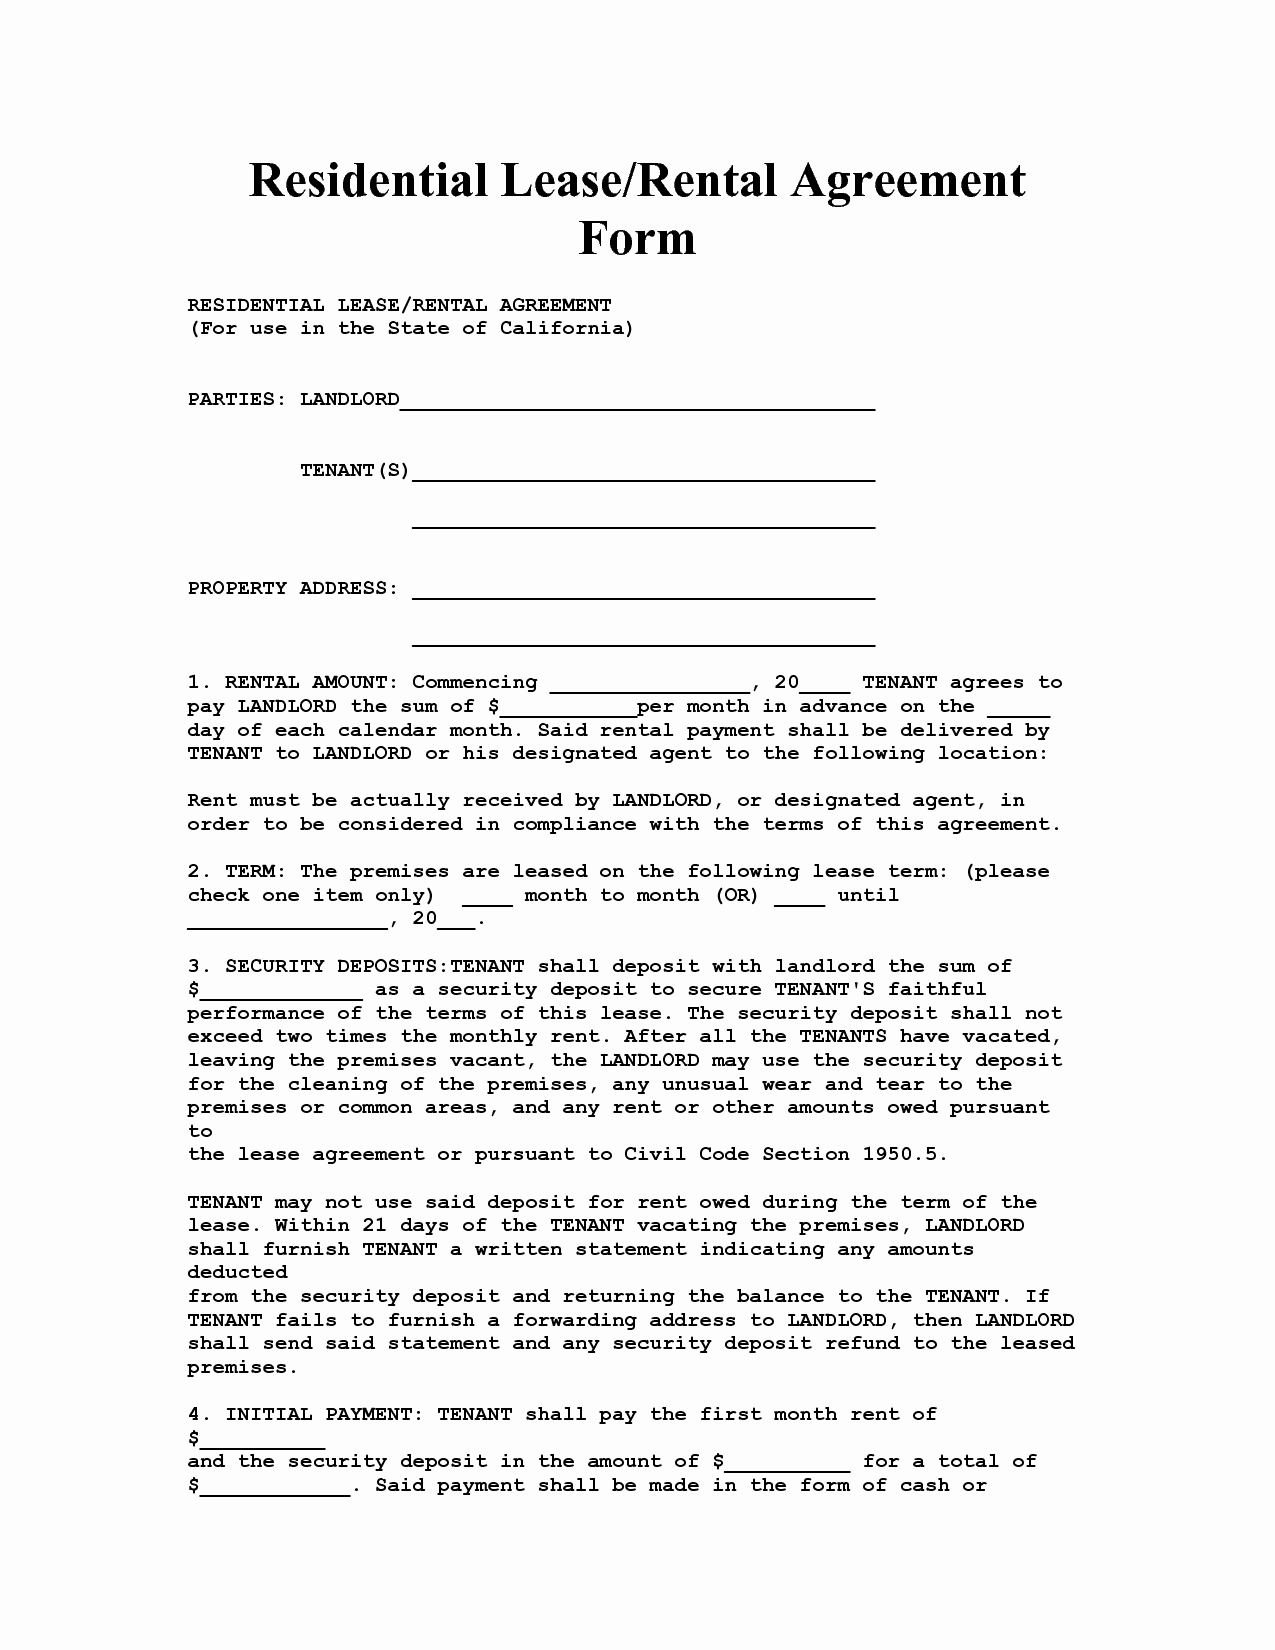 Sample Residential Lease Agreement Lovely California House Lease Agreement form